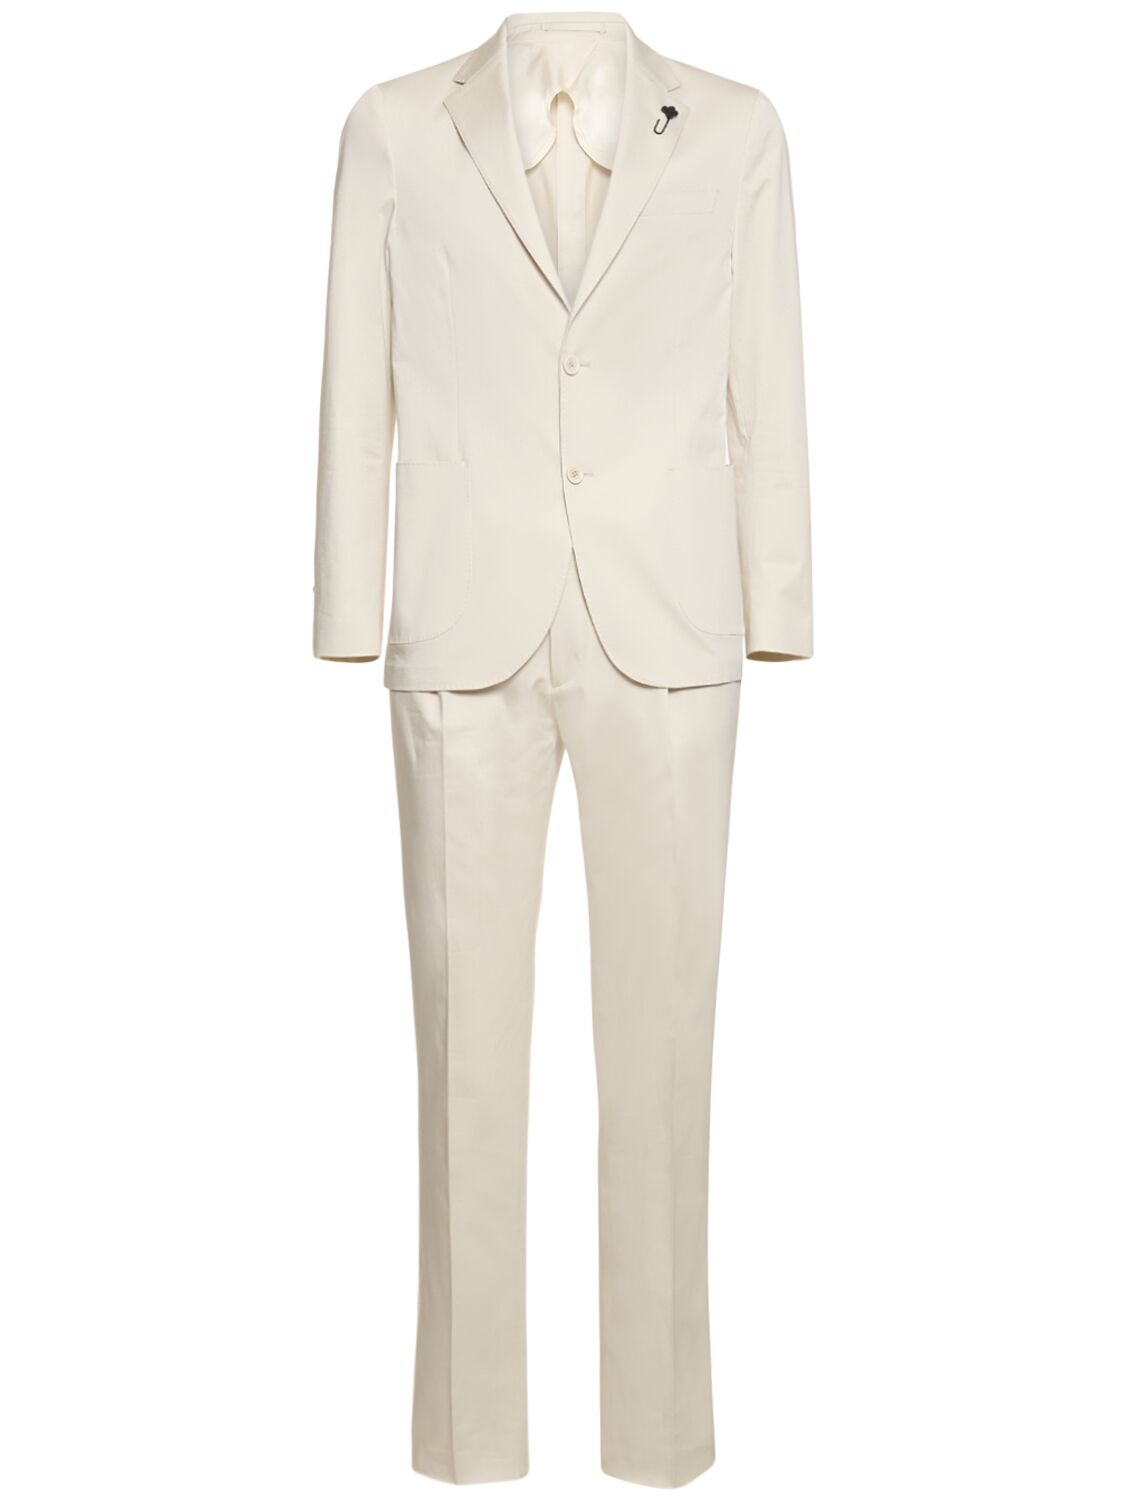 Image of Stretch Cotton Evening Suit